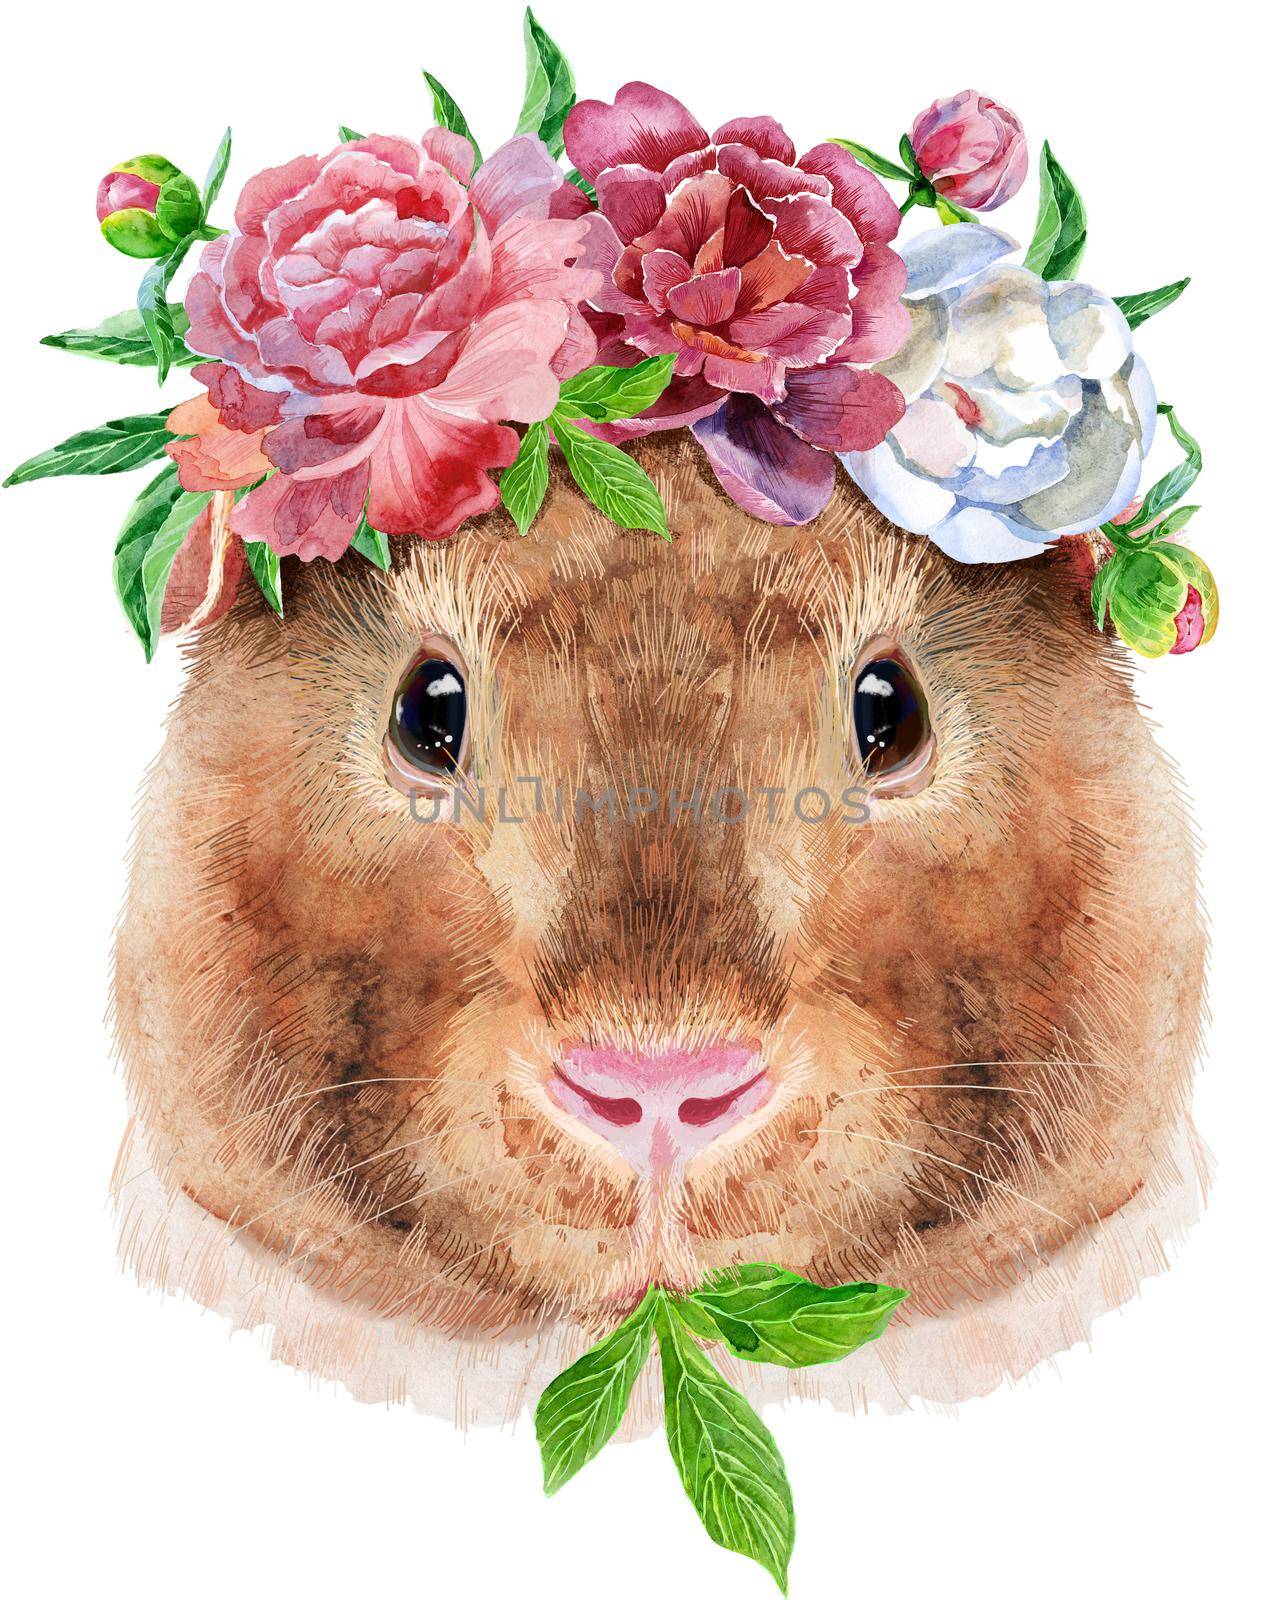 Watercolor portrait of Teddy guinea pig with flowers on white background by NataOmsk